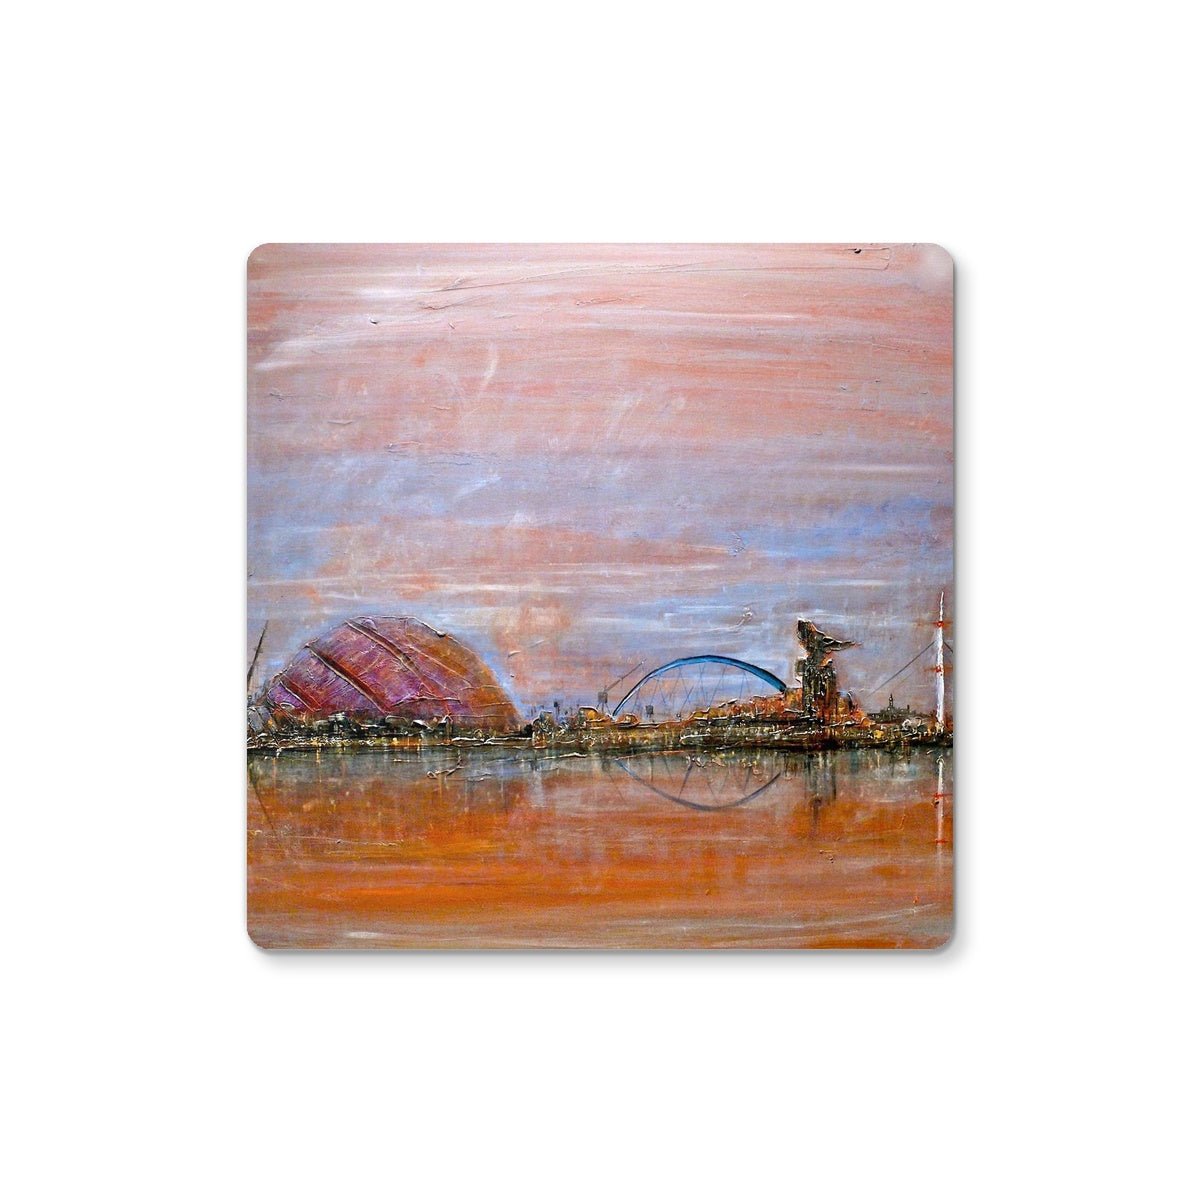 Glasgow Harbour Art Gifts Coaster-Coasters-Edinburgh & Glasgow Art Gallery-2 Coasters-Paintings, Prints, Homeware, Art Gifts From Scotland By Scottish Artist Kevin Hunter